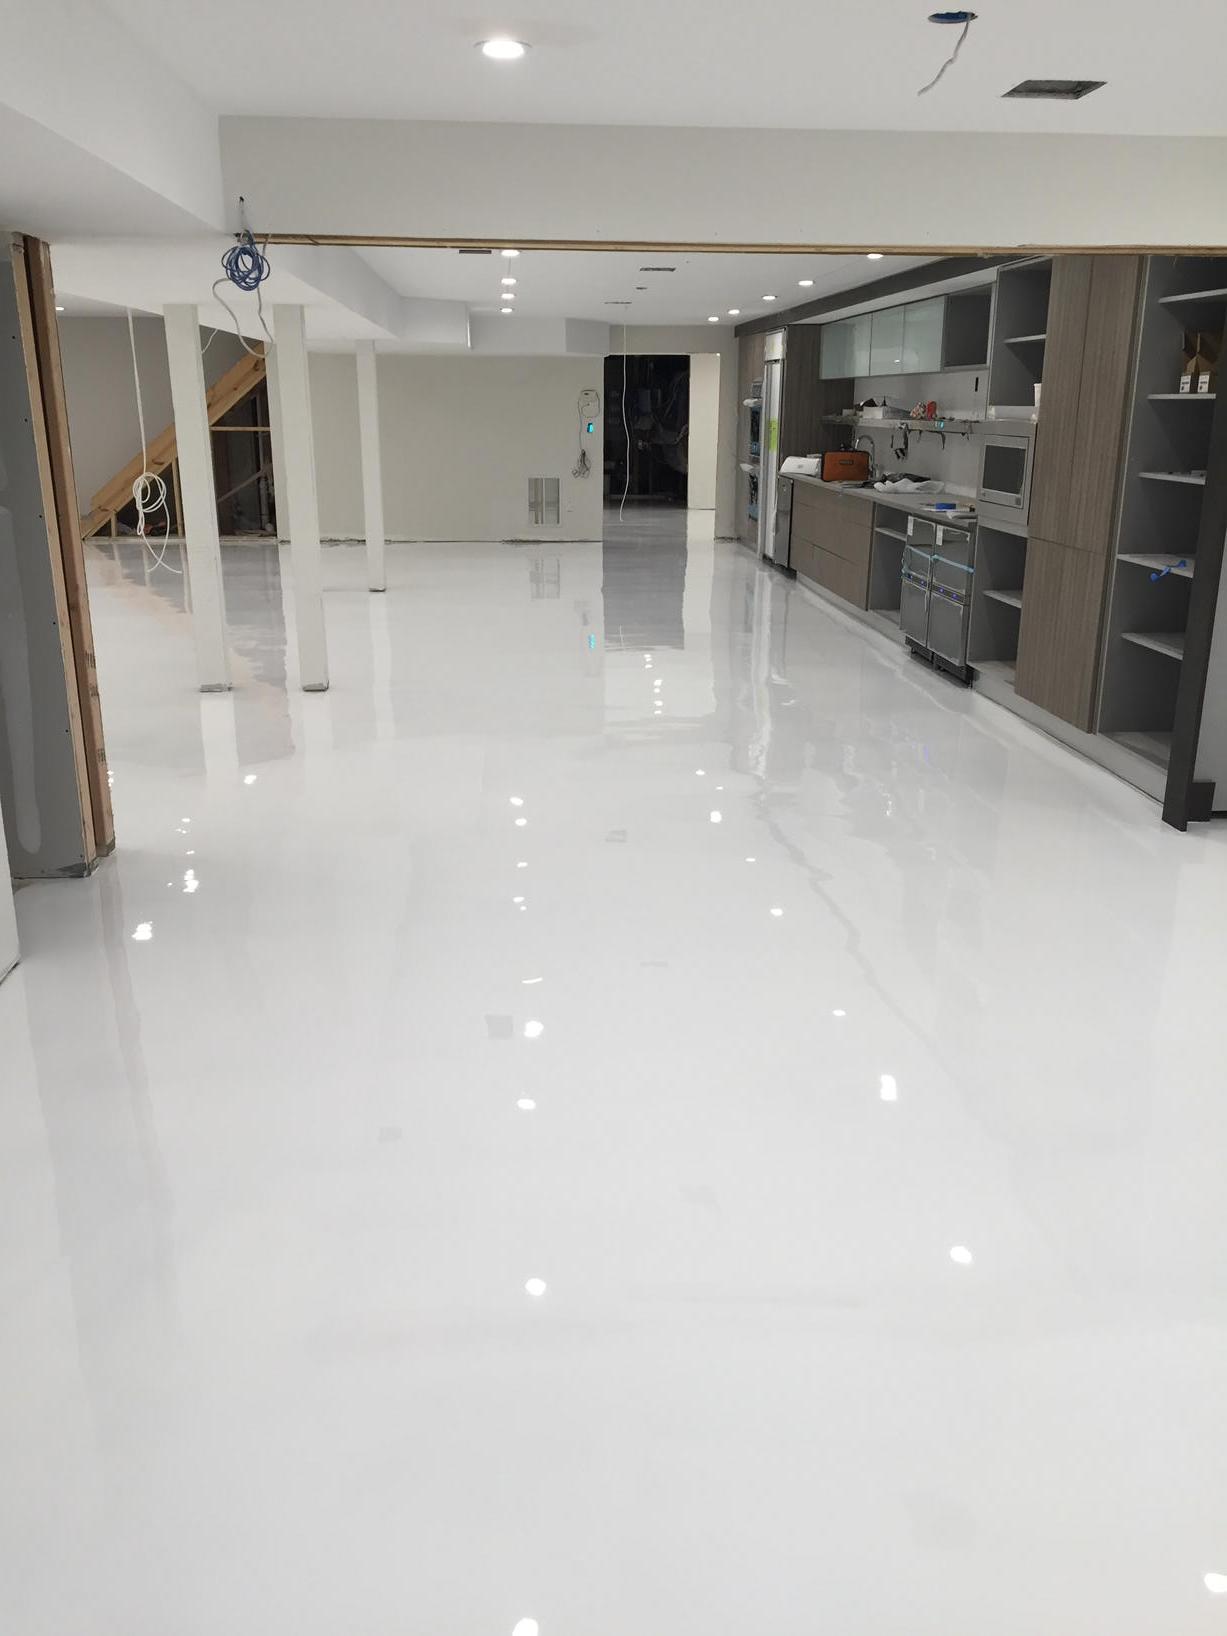 X 上的Epoxy Plus：「One of our customers just installed this white